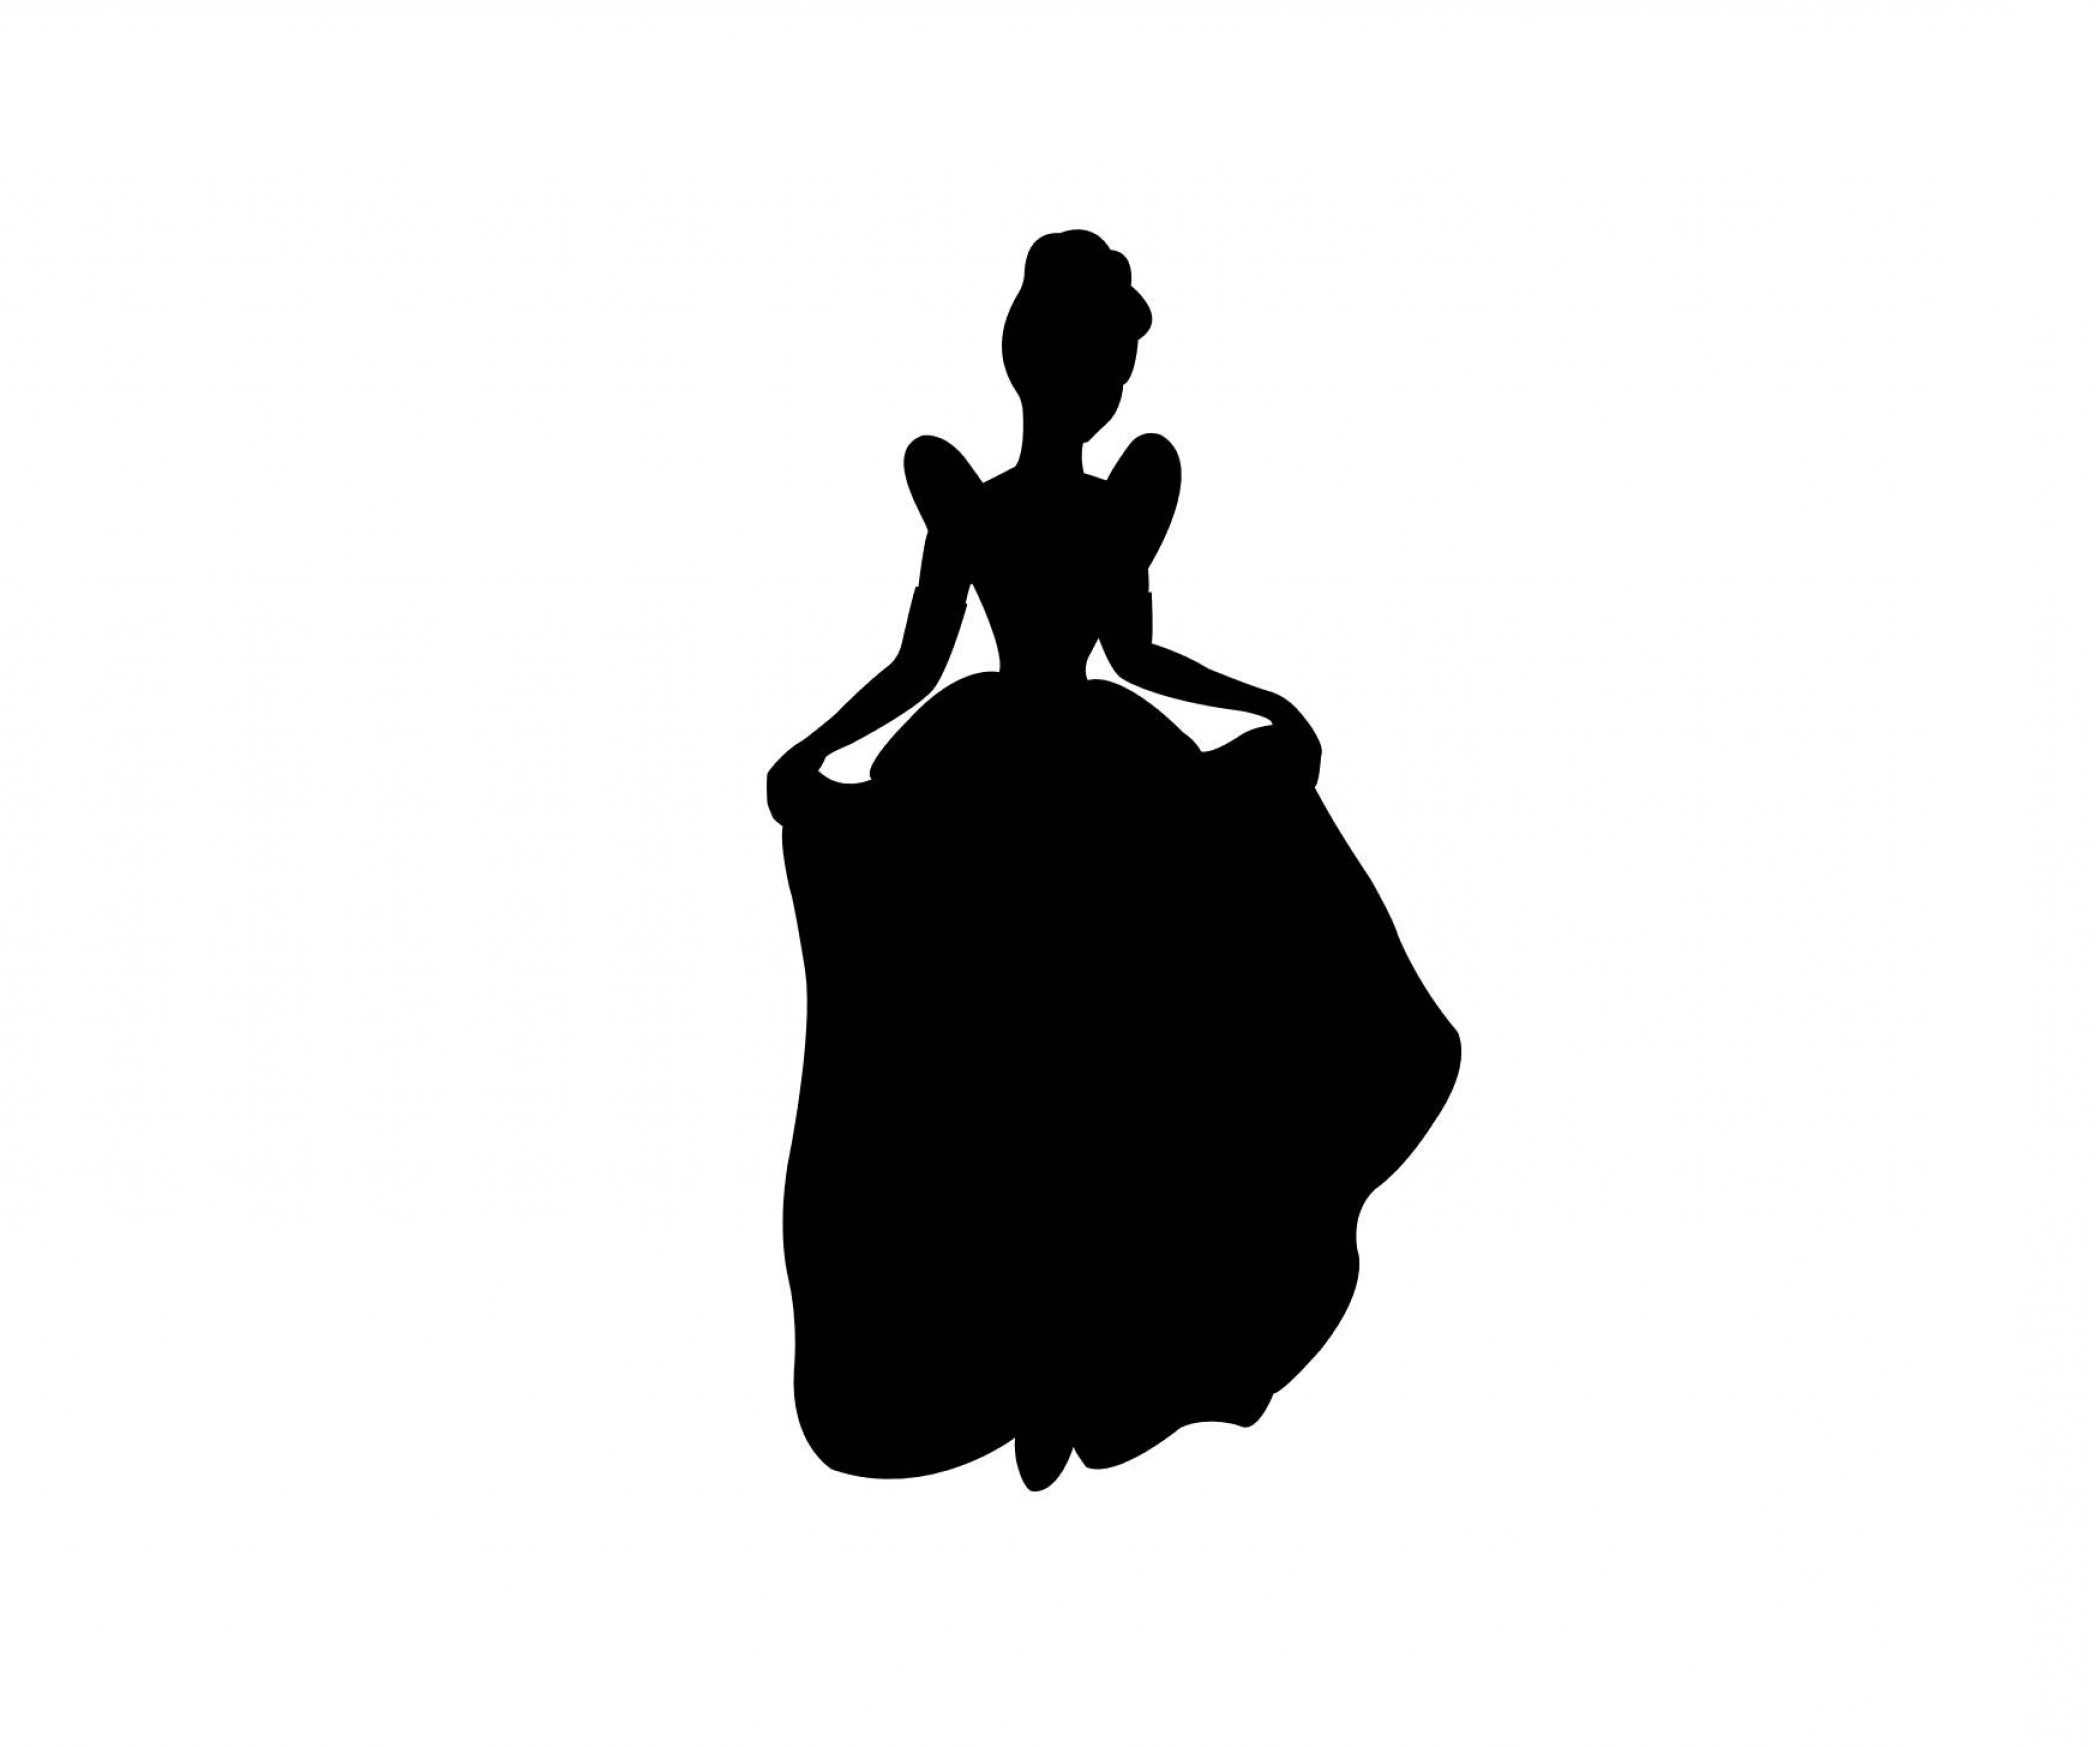 2096x1747 Cinderella Silhouette Vector And Png Catchsplace. 